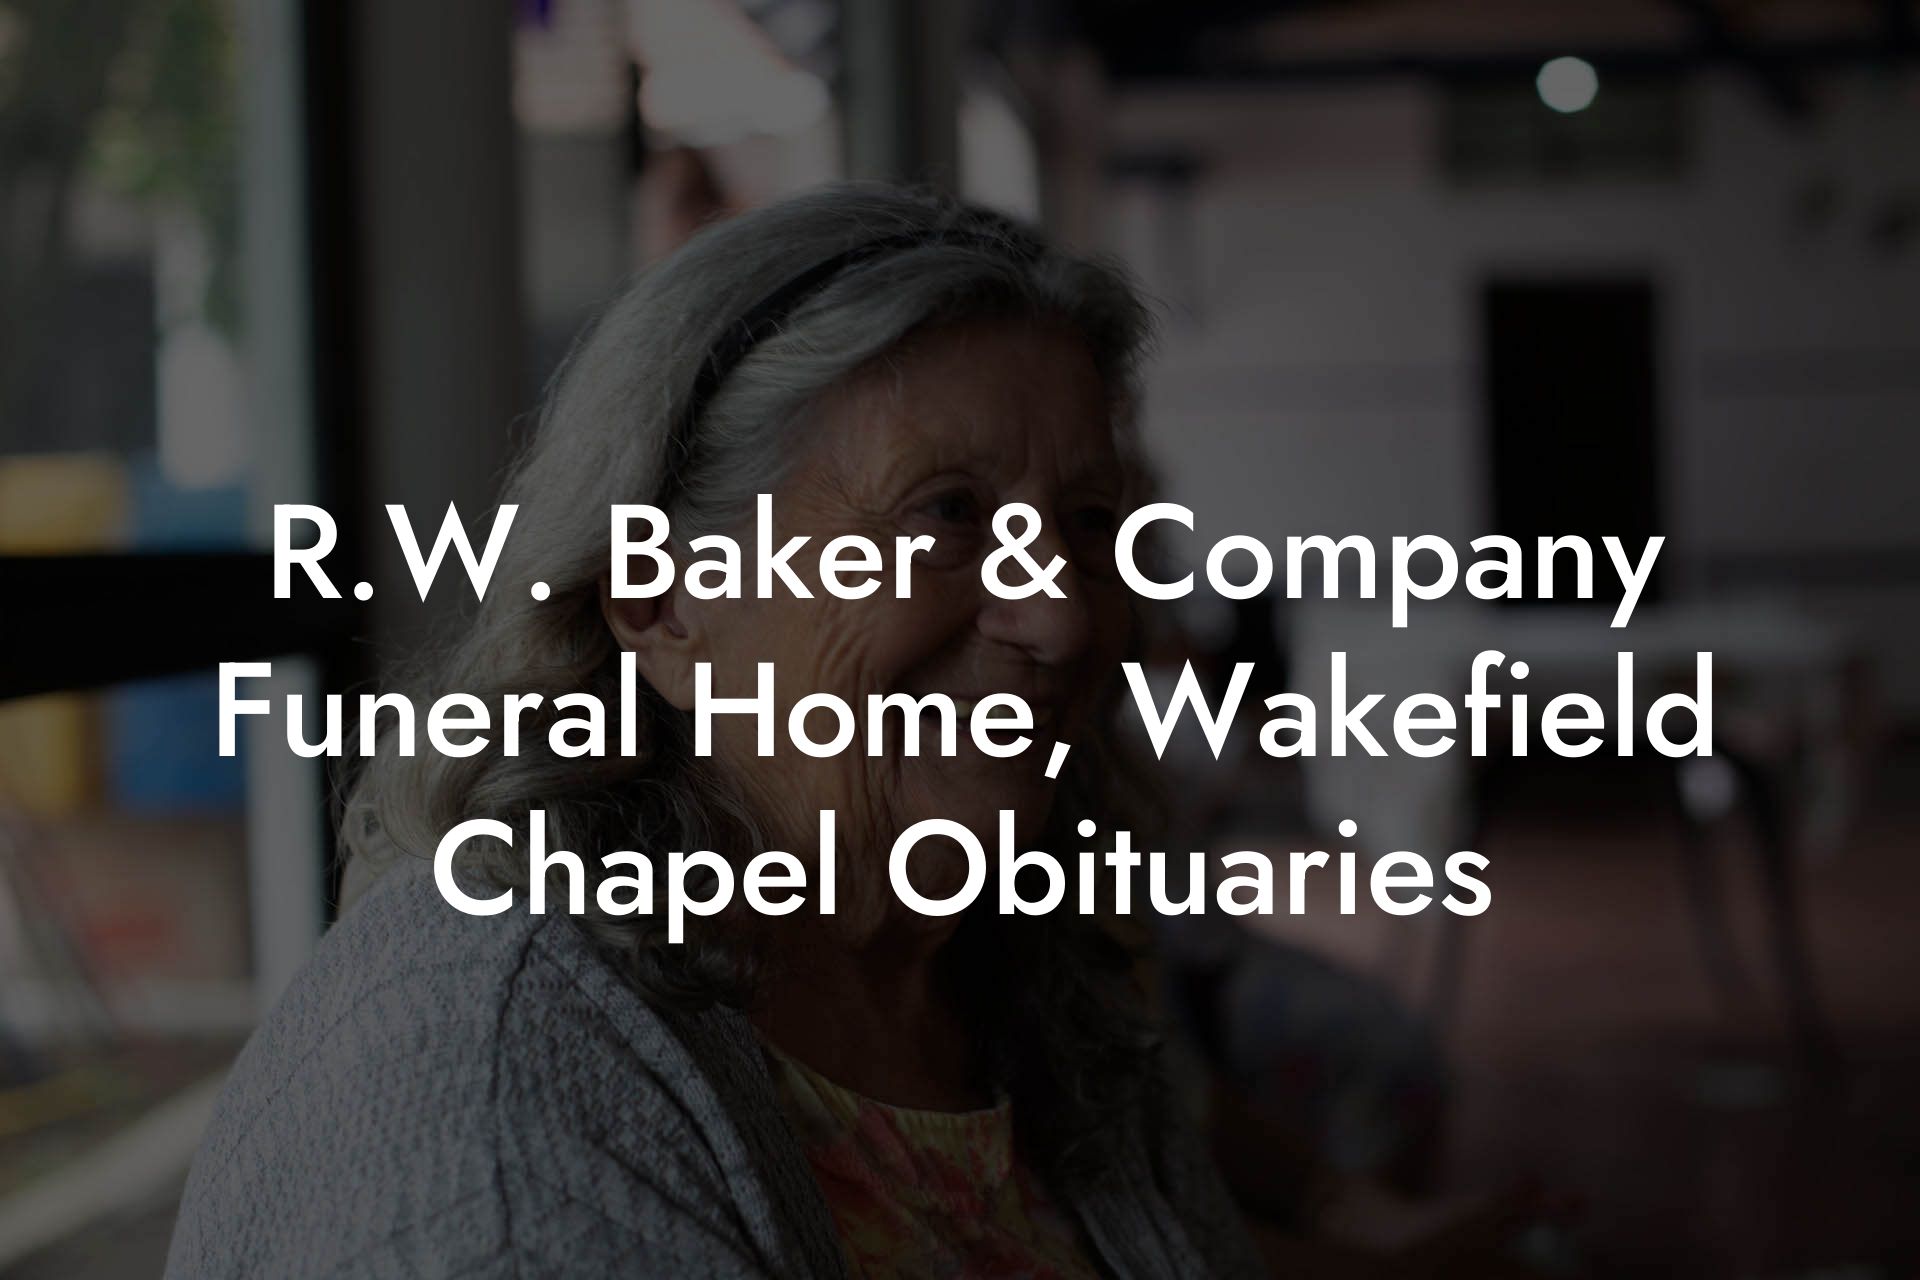 R.W. Baker & Company Funeral Home, Wakefield Chapel Obituaries